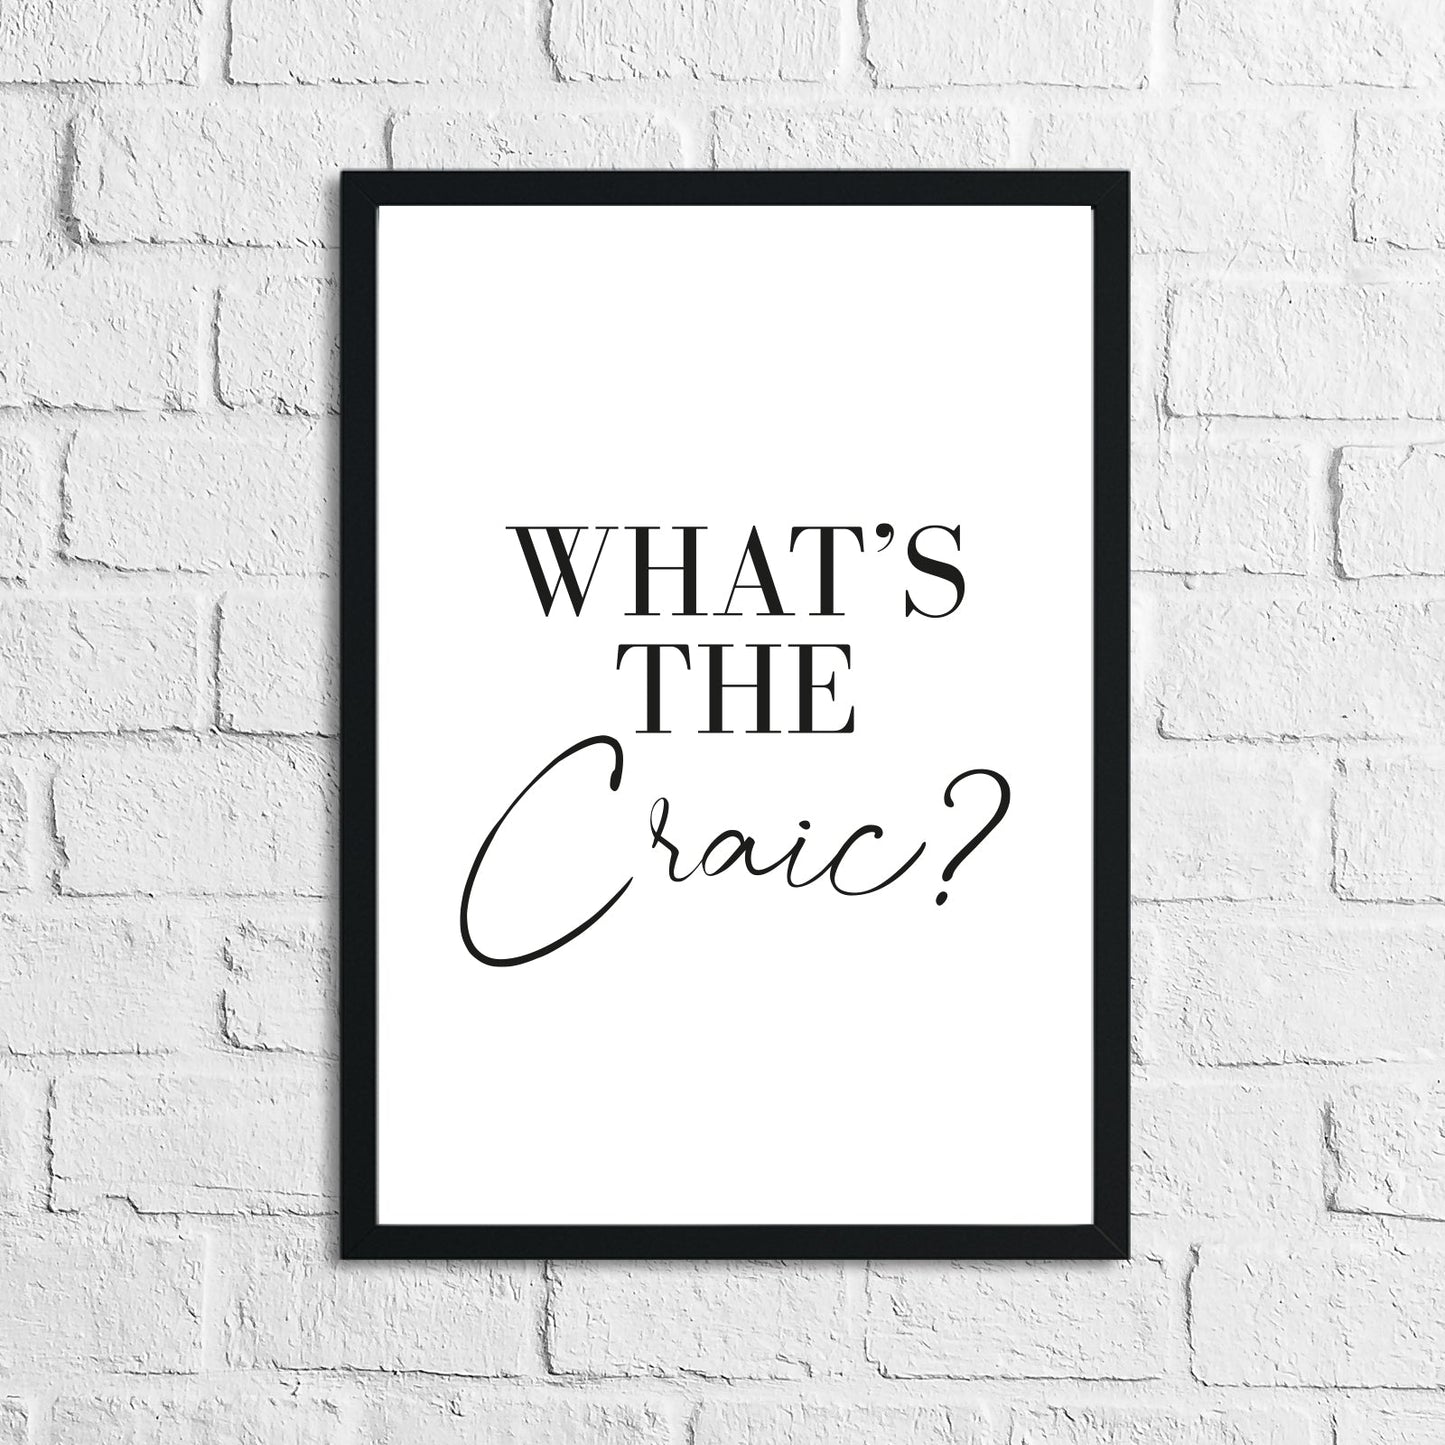 Whats The Craic? Funny Home Wall Decor Print